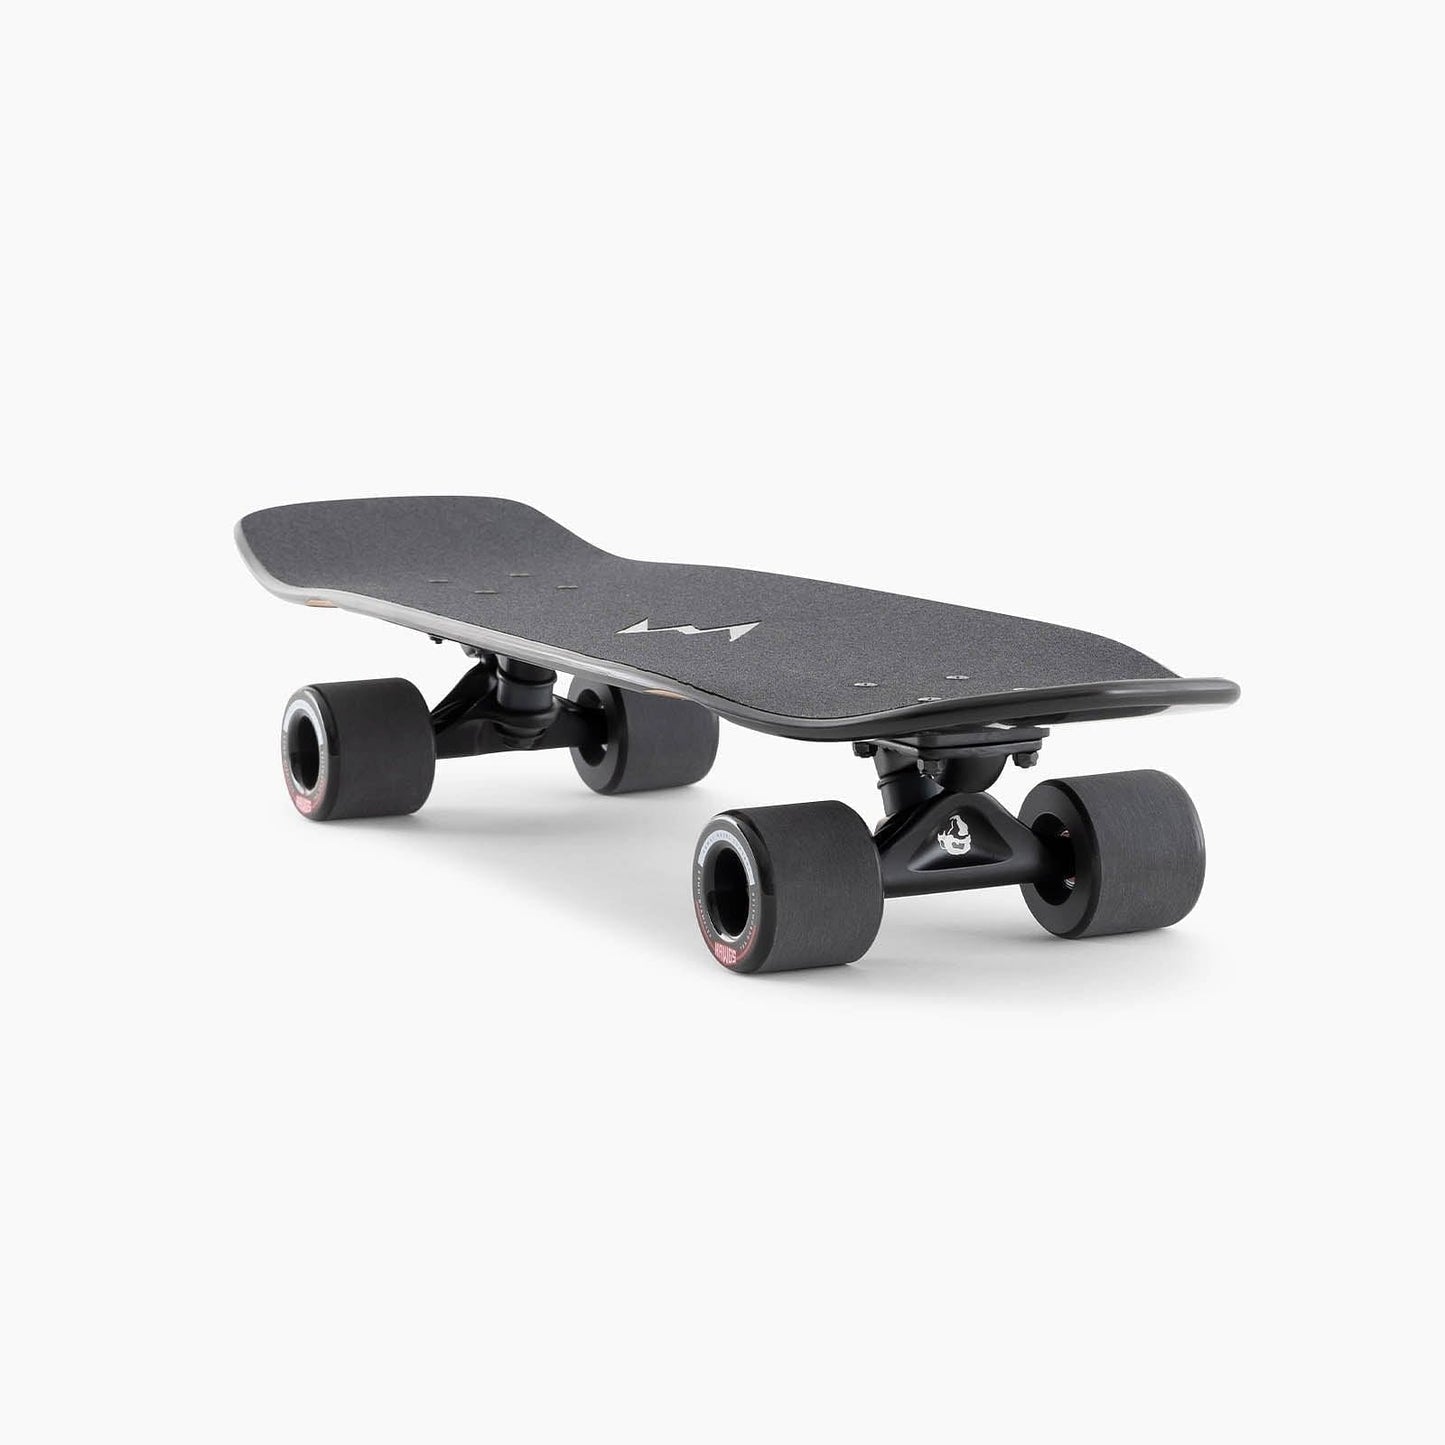 Landyachtz | Dinghy Coffin XL Card Cruiser Complete - 28" (Wheels And Trucks May Vary)